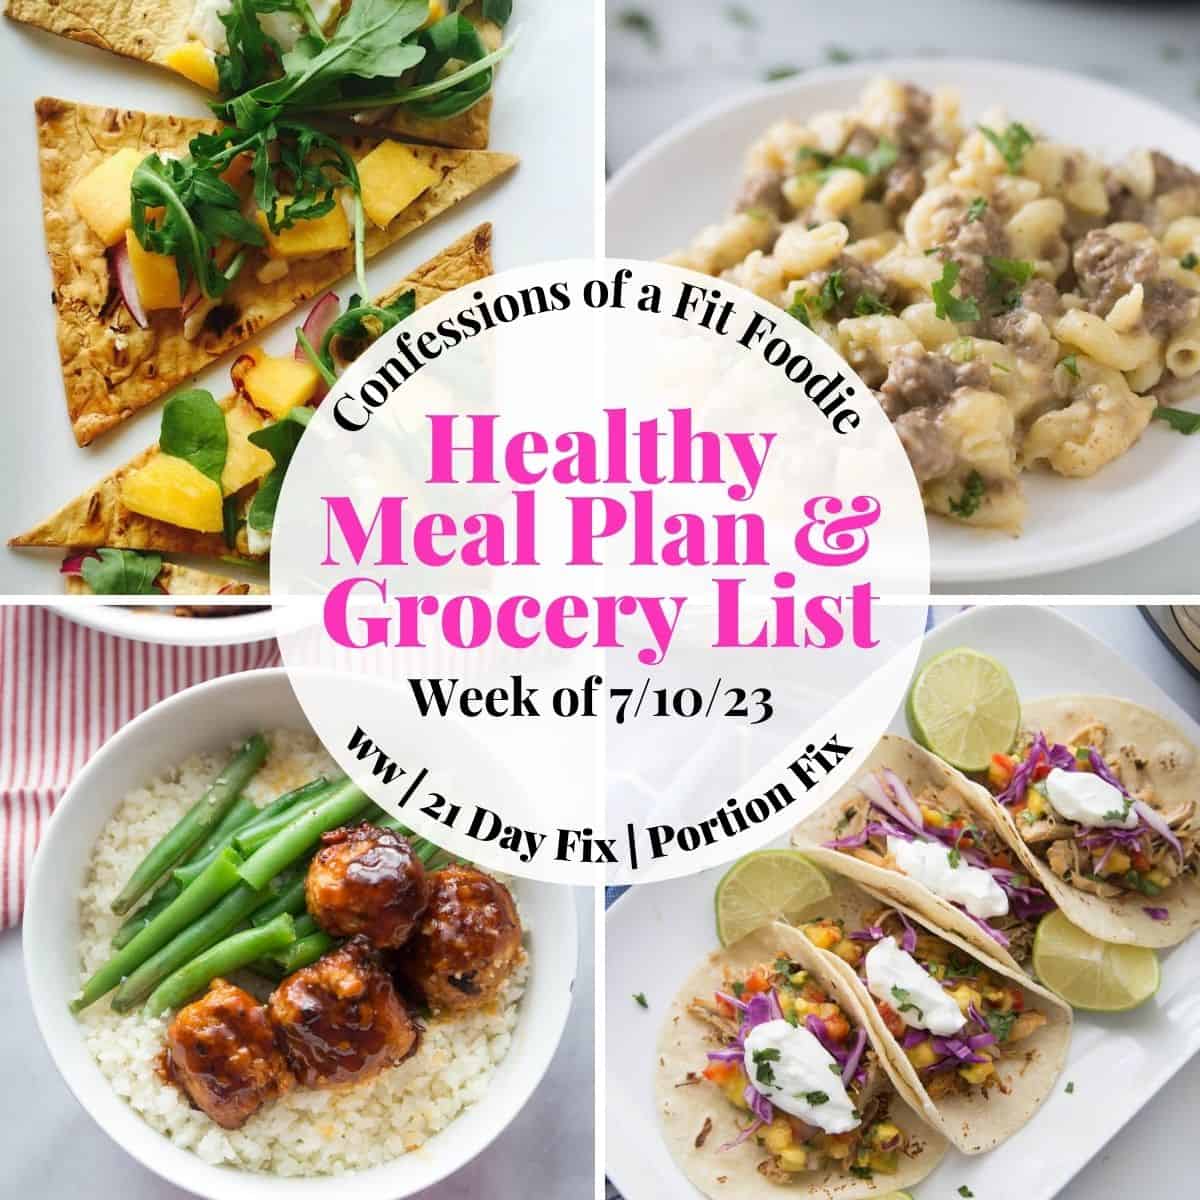 Food photo collage with pink and black text on a white circle. Text says, "Healthy Meal Plan & Grocery List Week of 7/10/23"